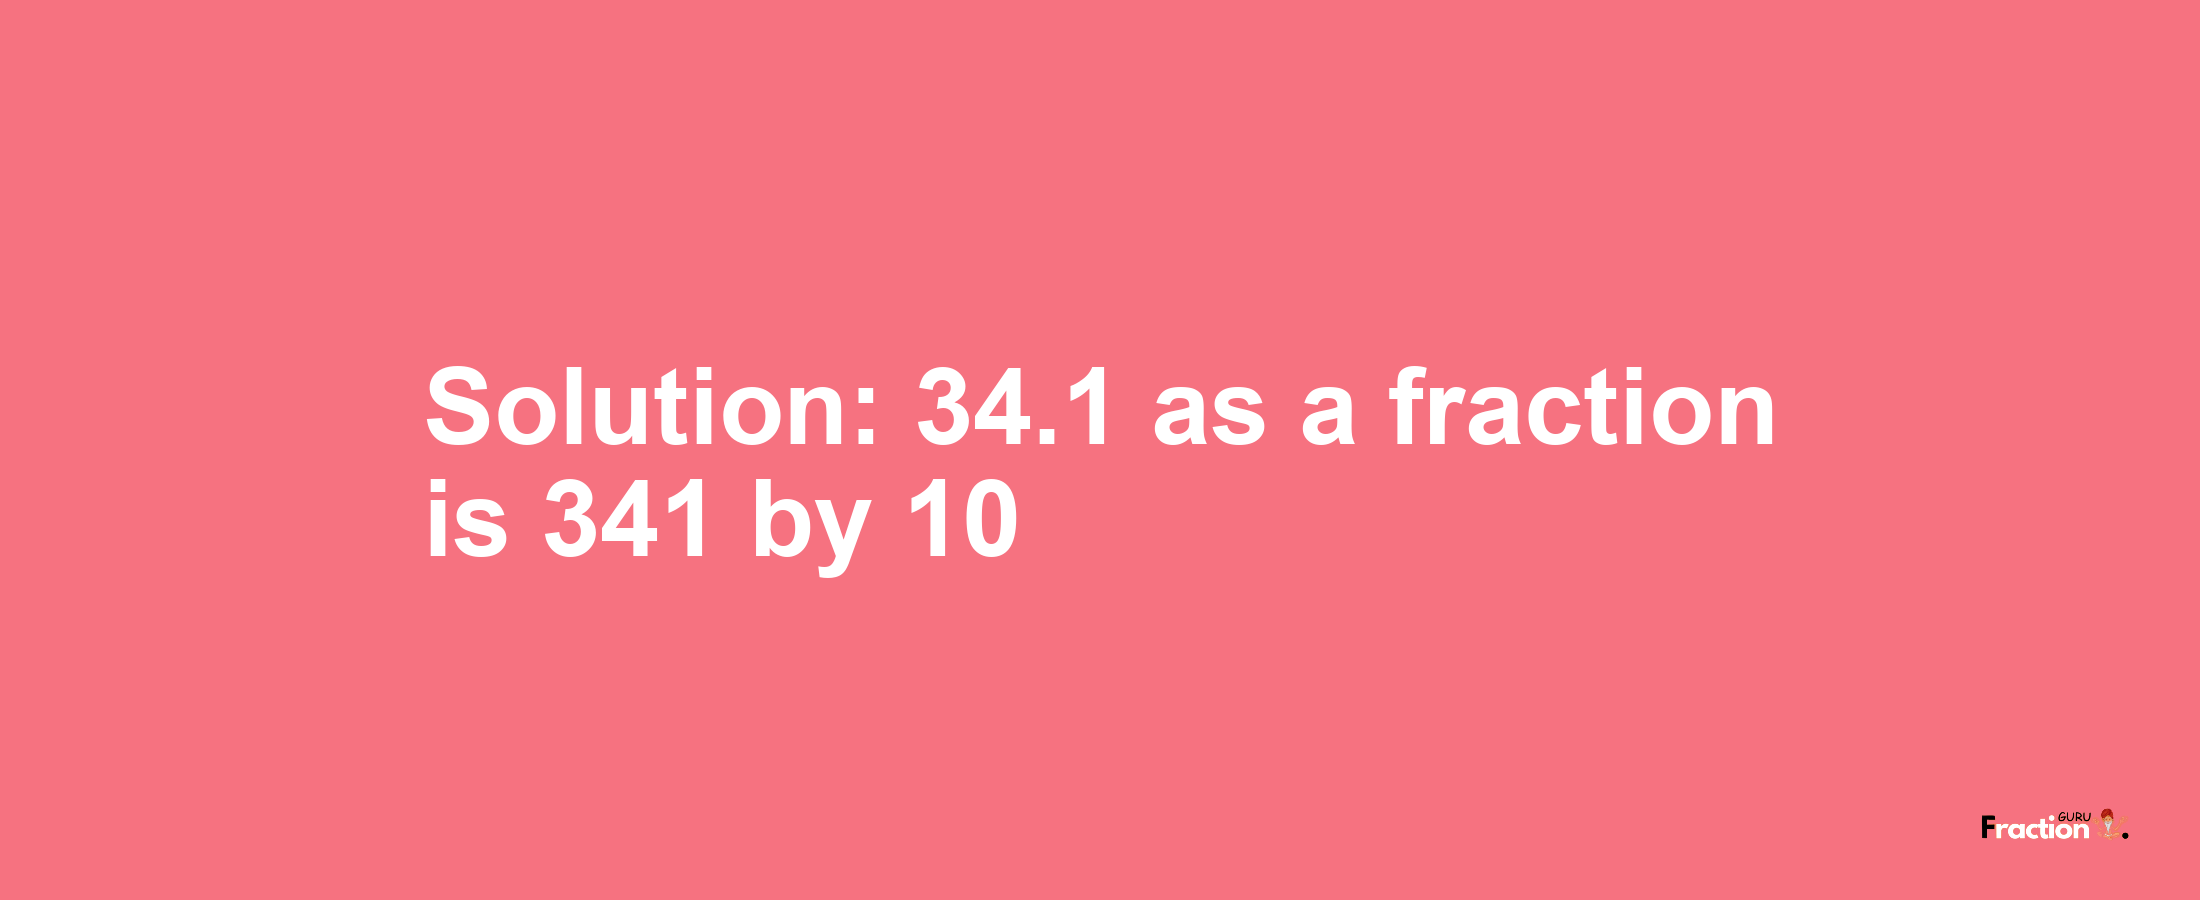 Solution:34.1 as a fraction is 341/10